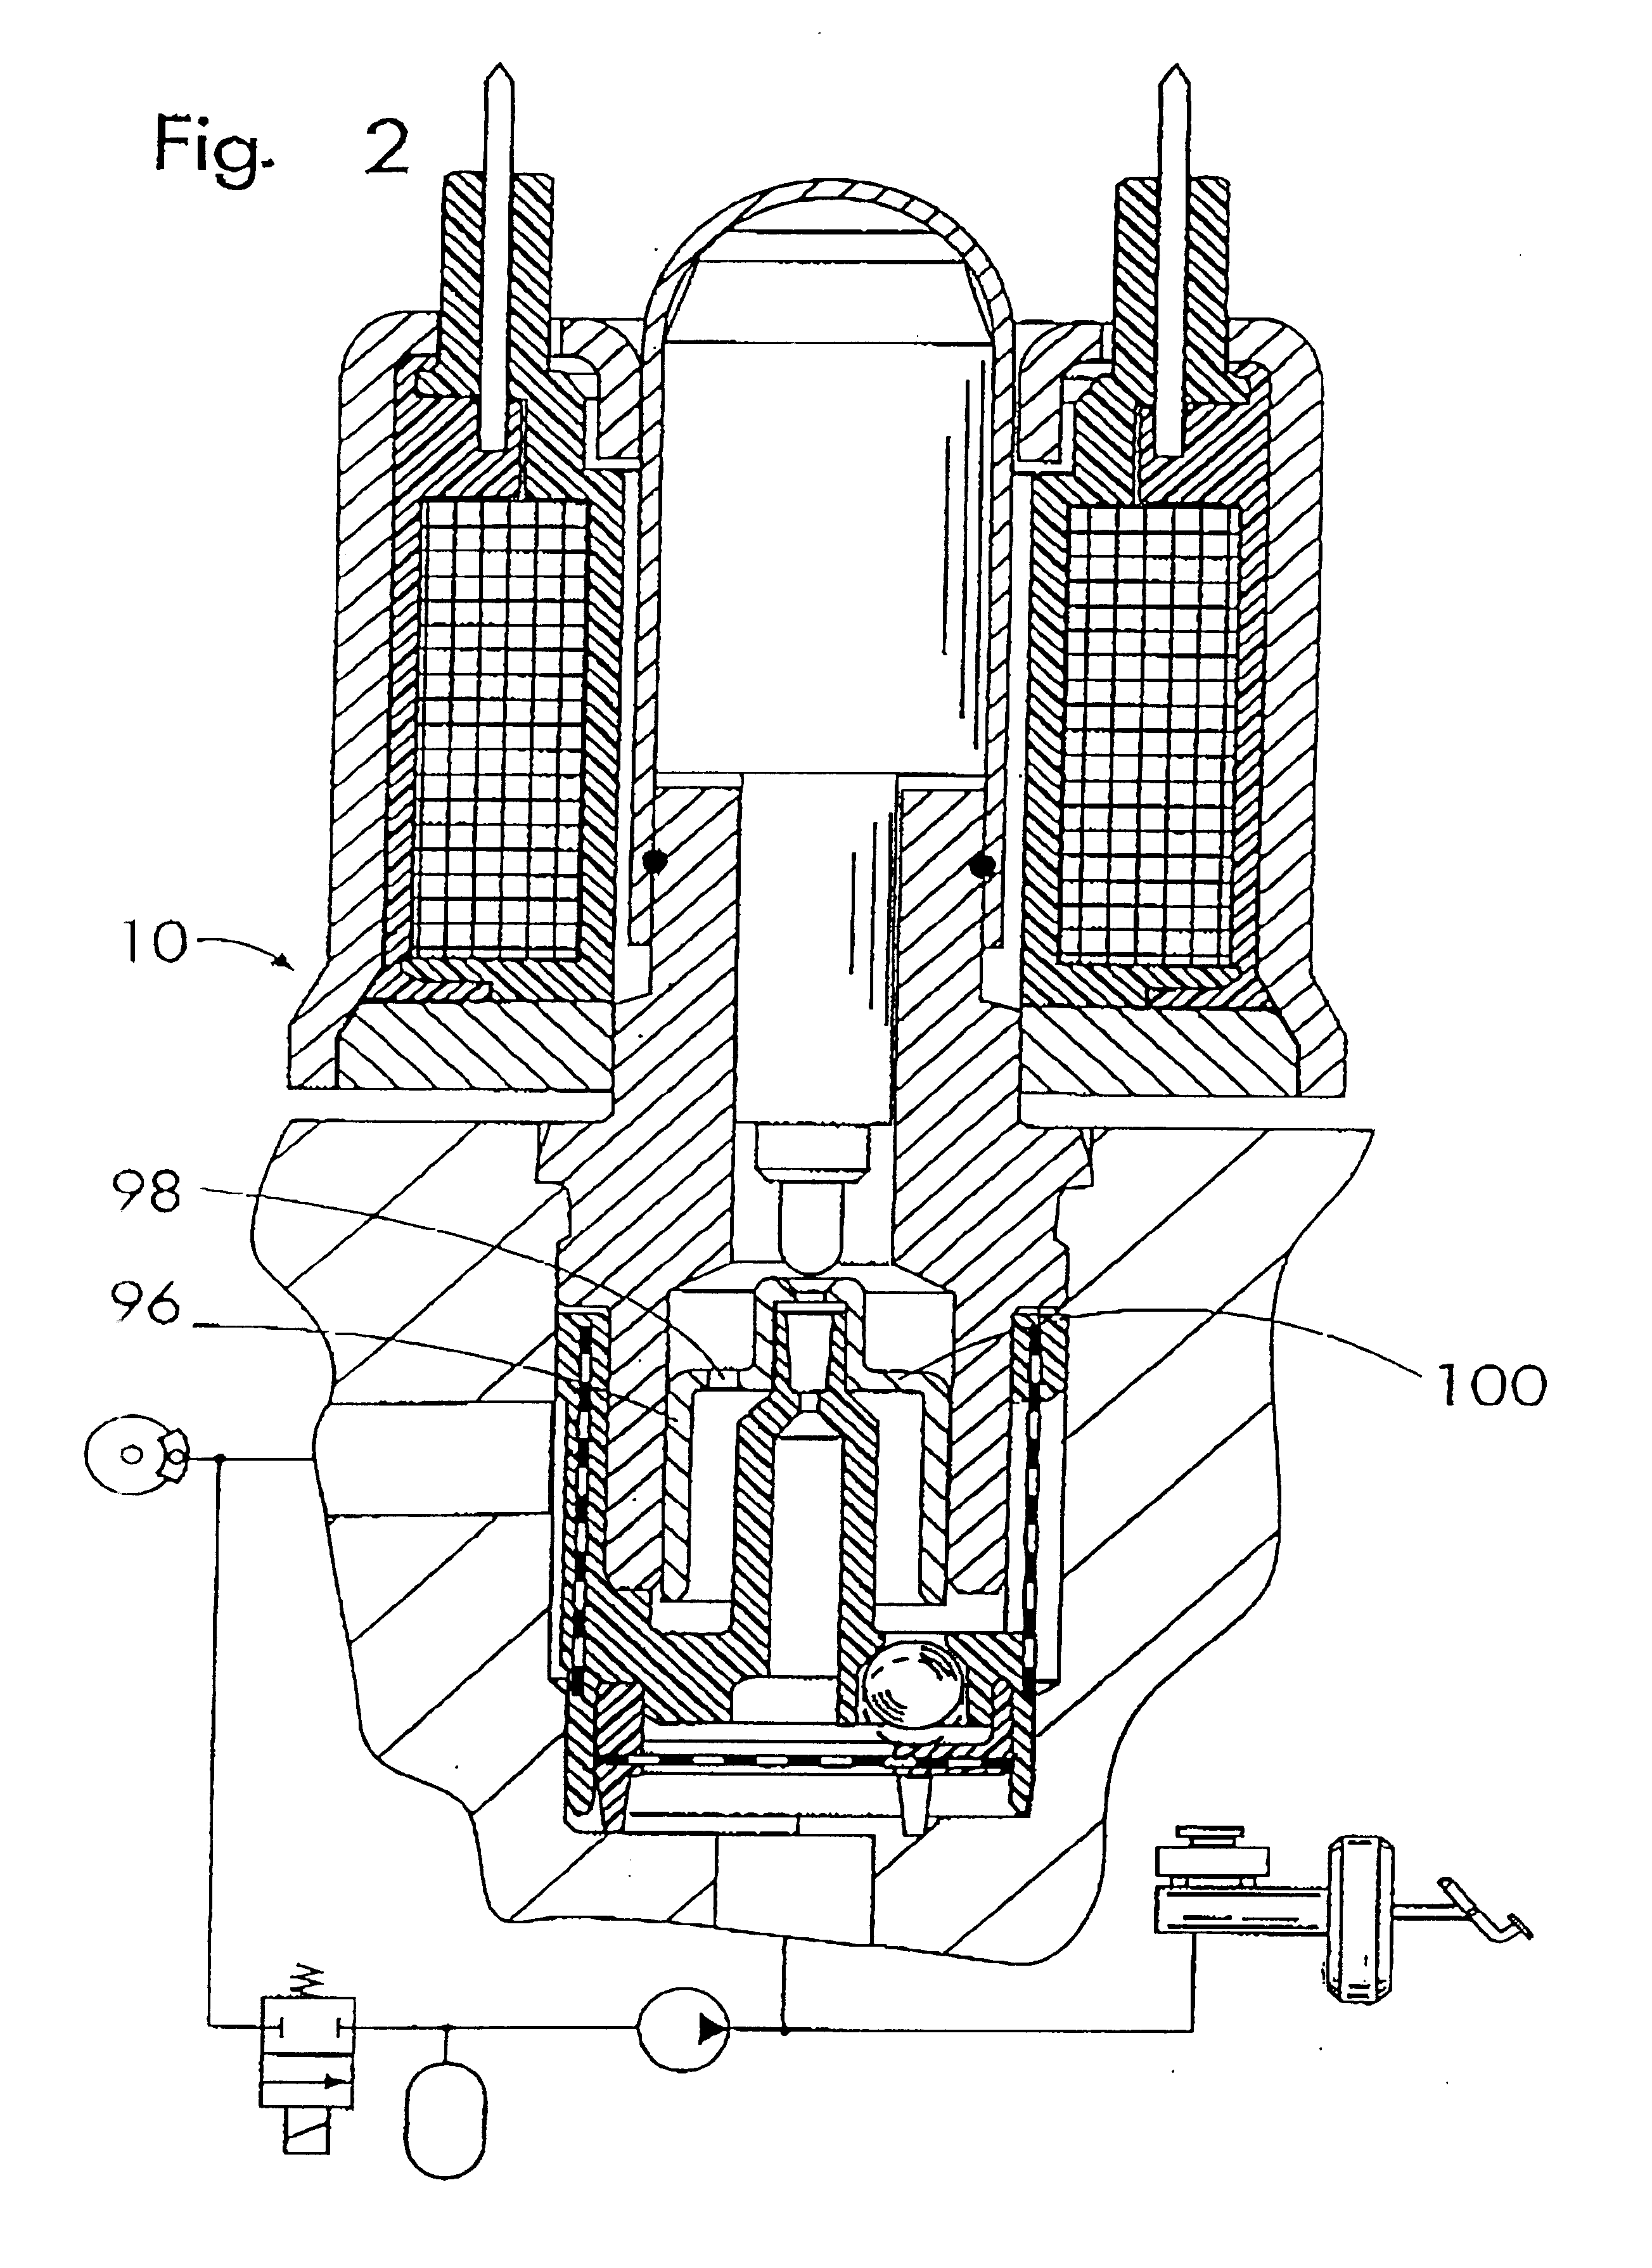 Solenoid valve for a slip-regulated hydraulic brake system of a vehicle